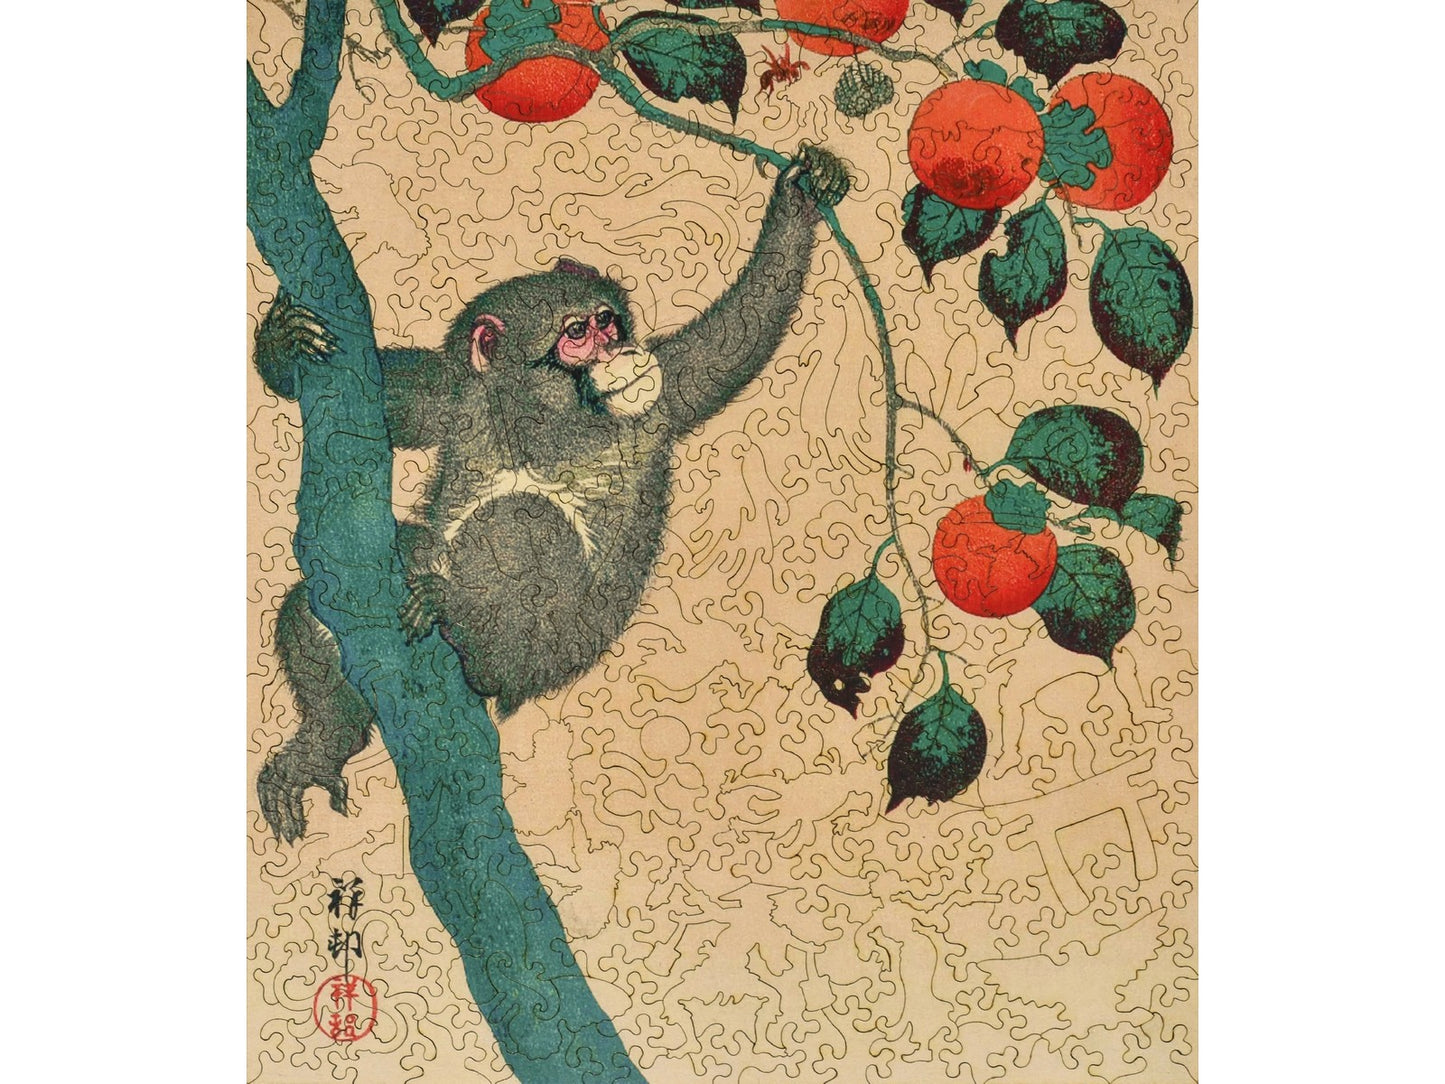 The front of the puzzle, Monkey in Persimmon Tree, which shows a monkey in fruit tree.